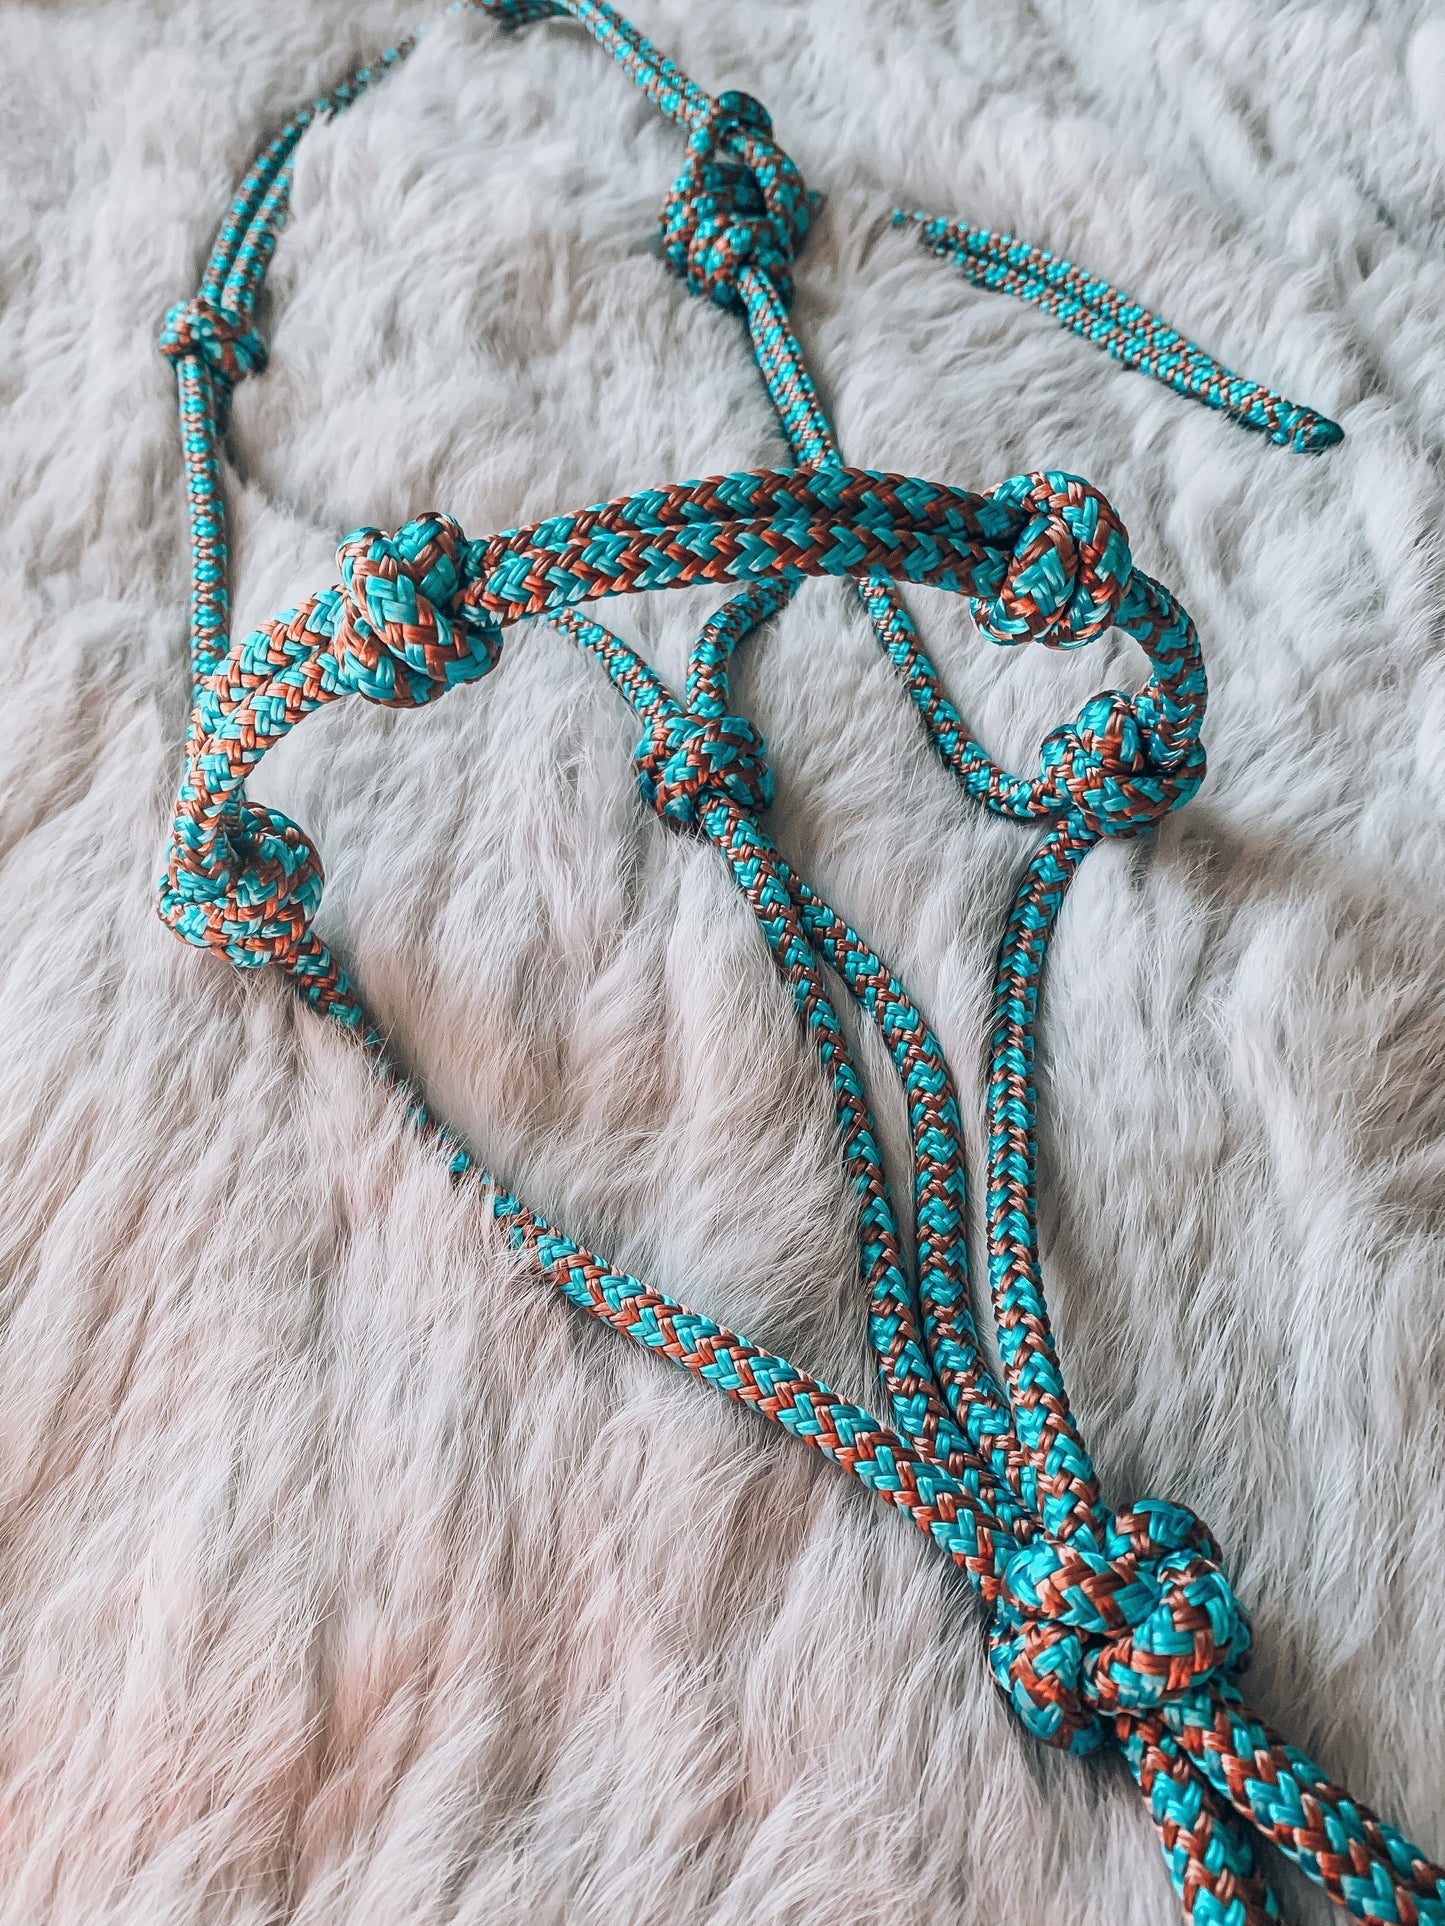 4 Knot Rope Halter - "JUNGLE"